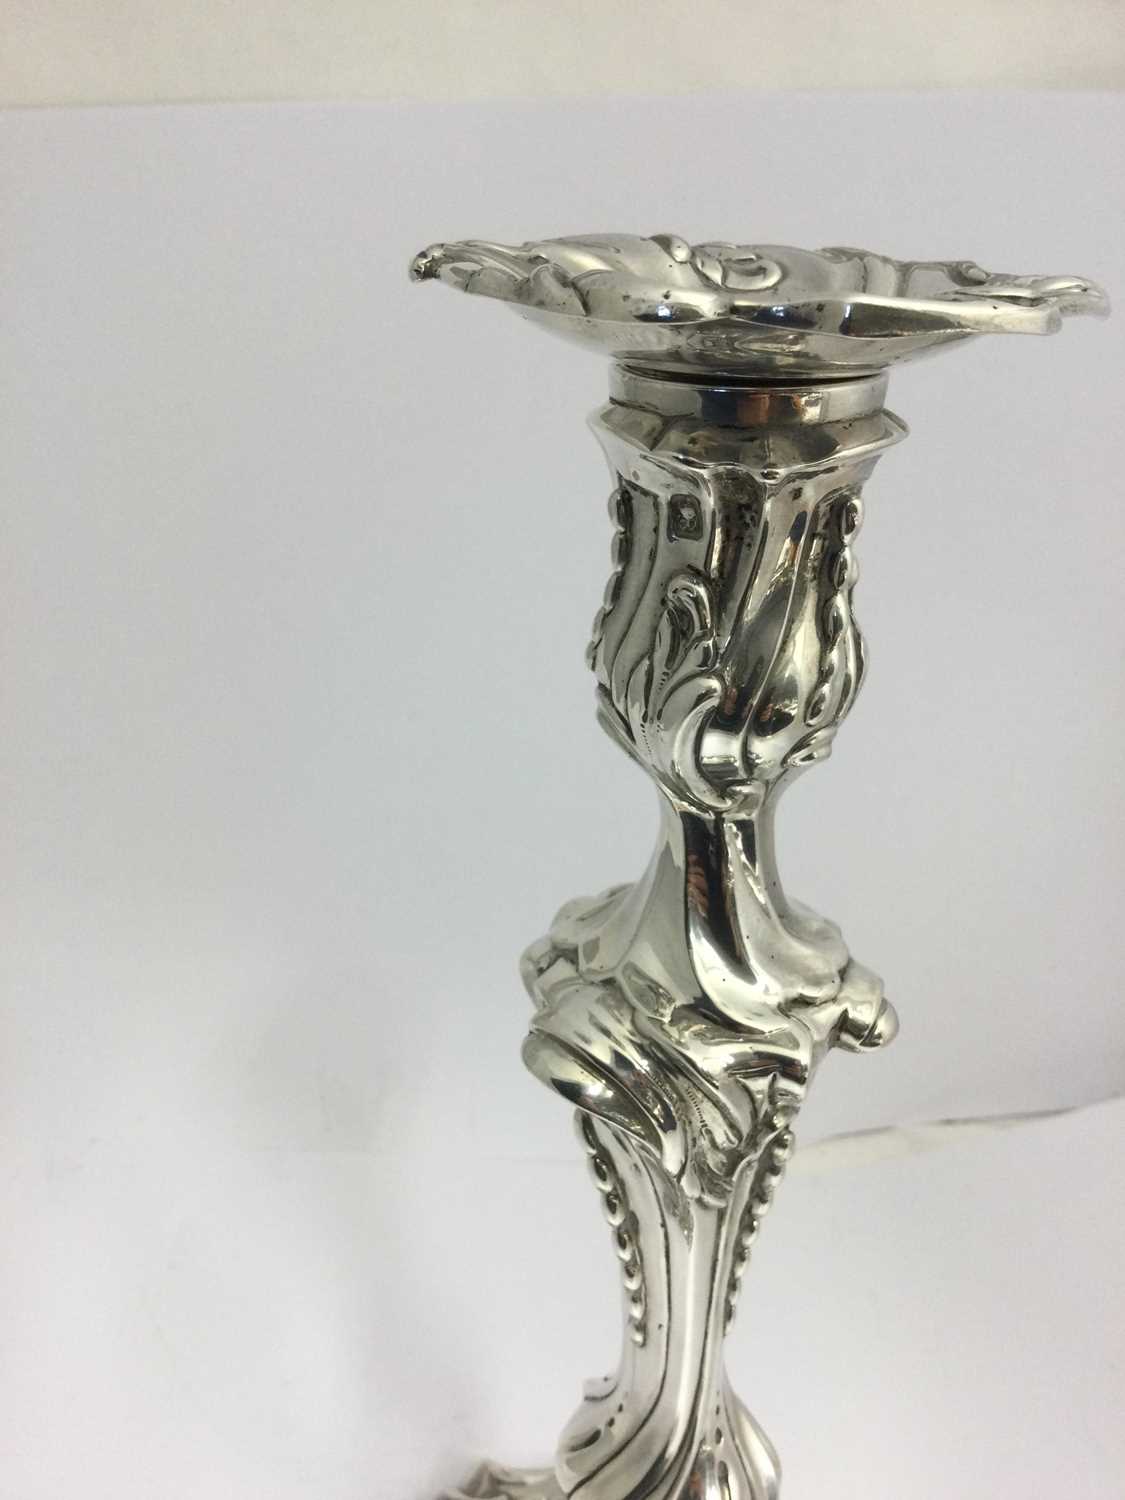 A Pair of George III Silver Candlesticks, Probably by John Carter, London, 1768 - Image 9 of 15